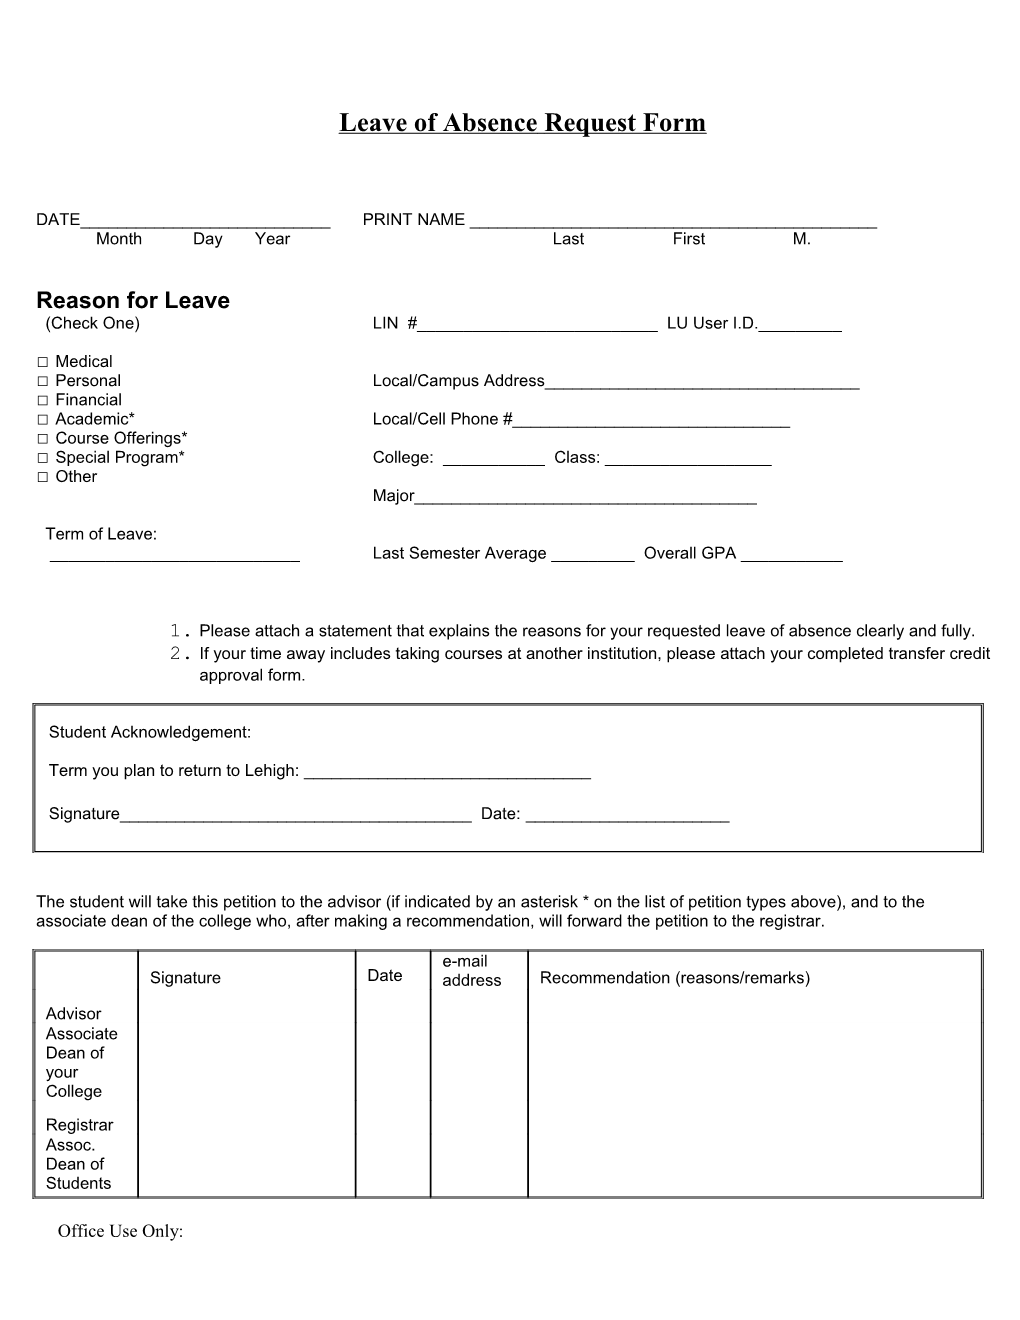 Leave of Absencerequest Form